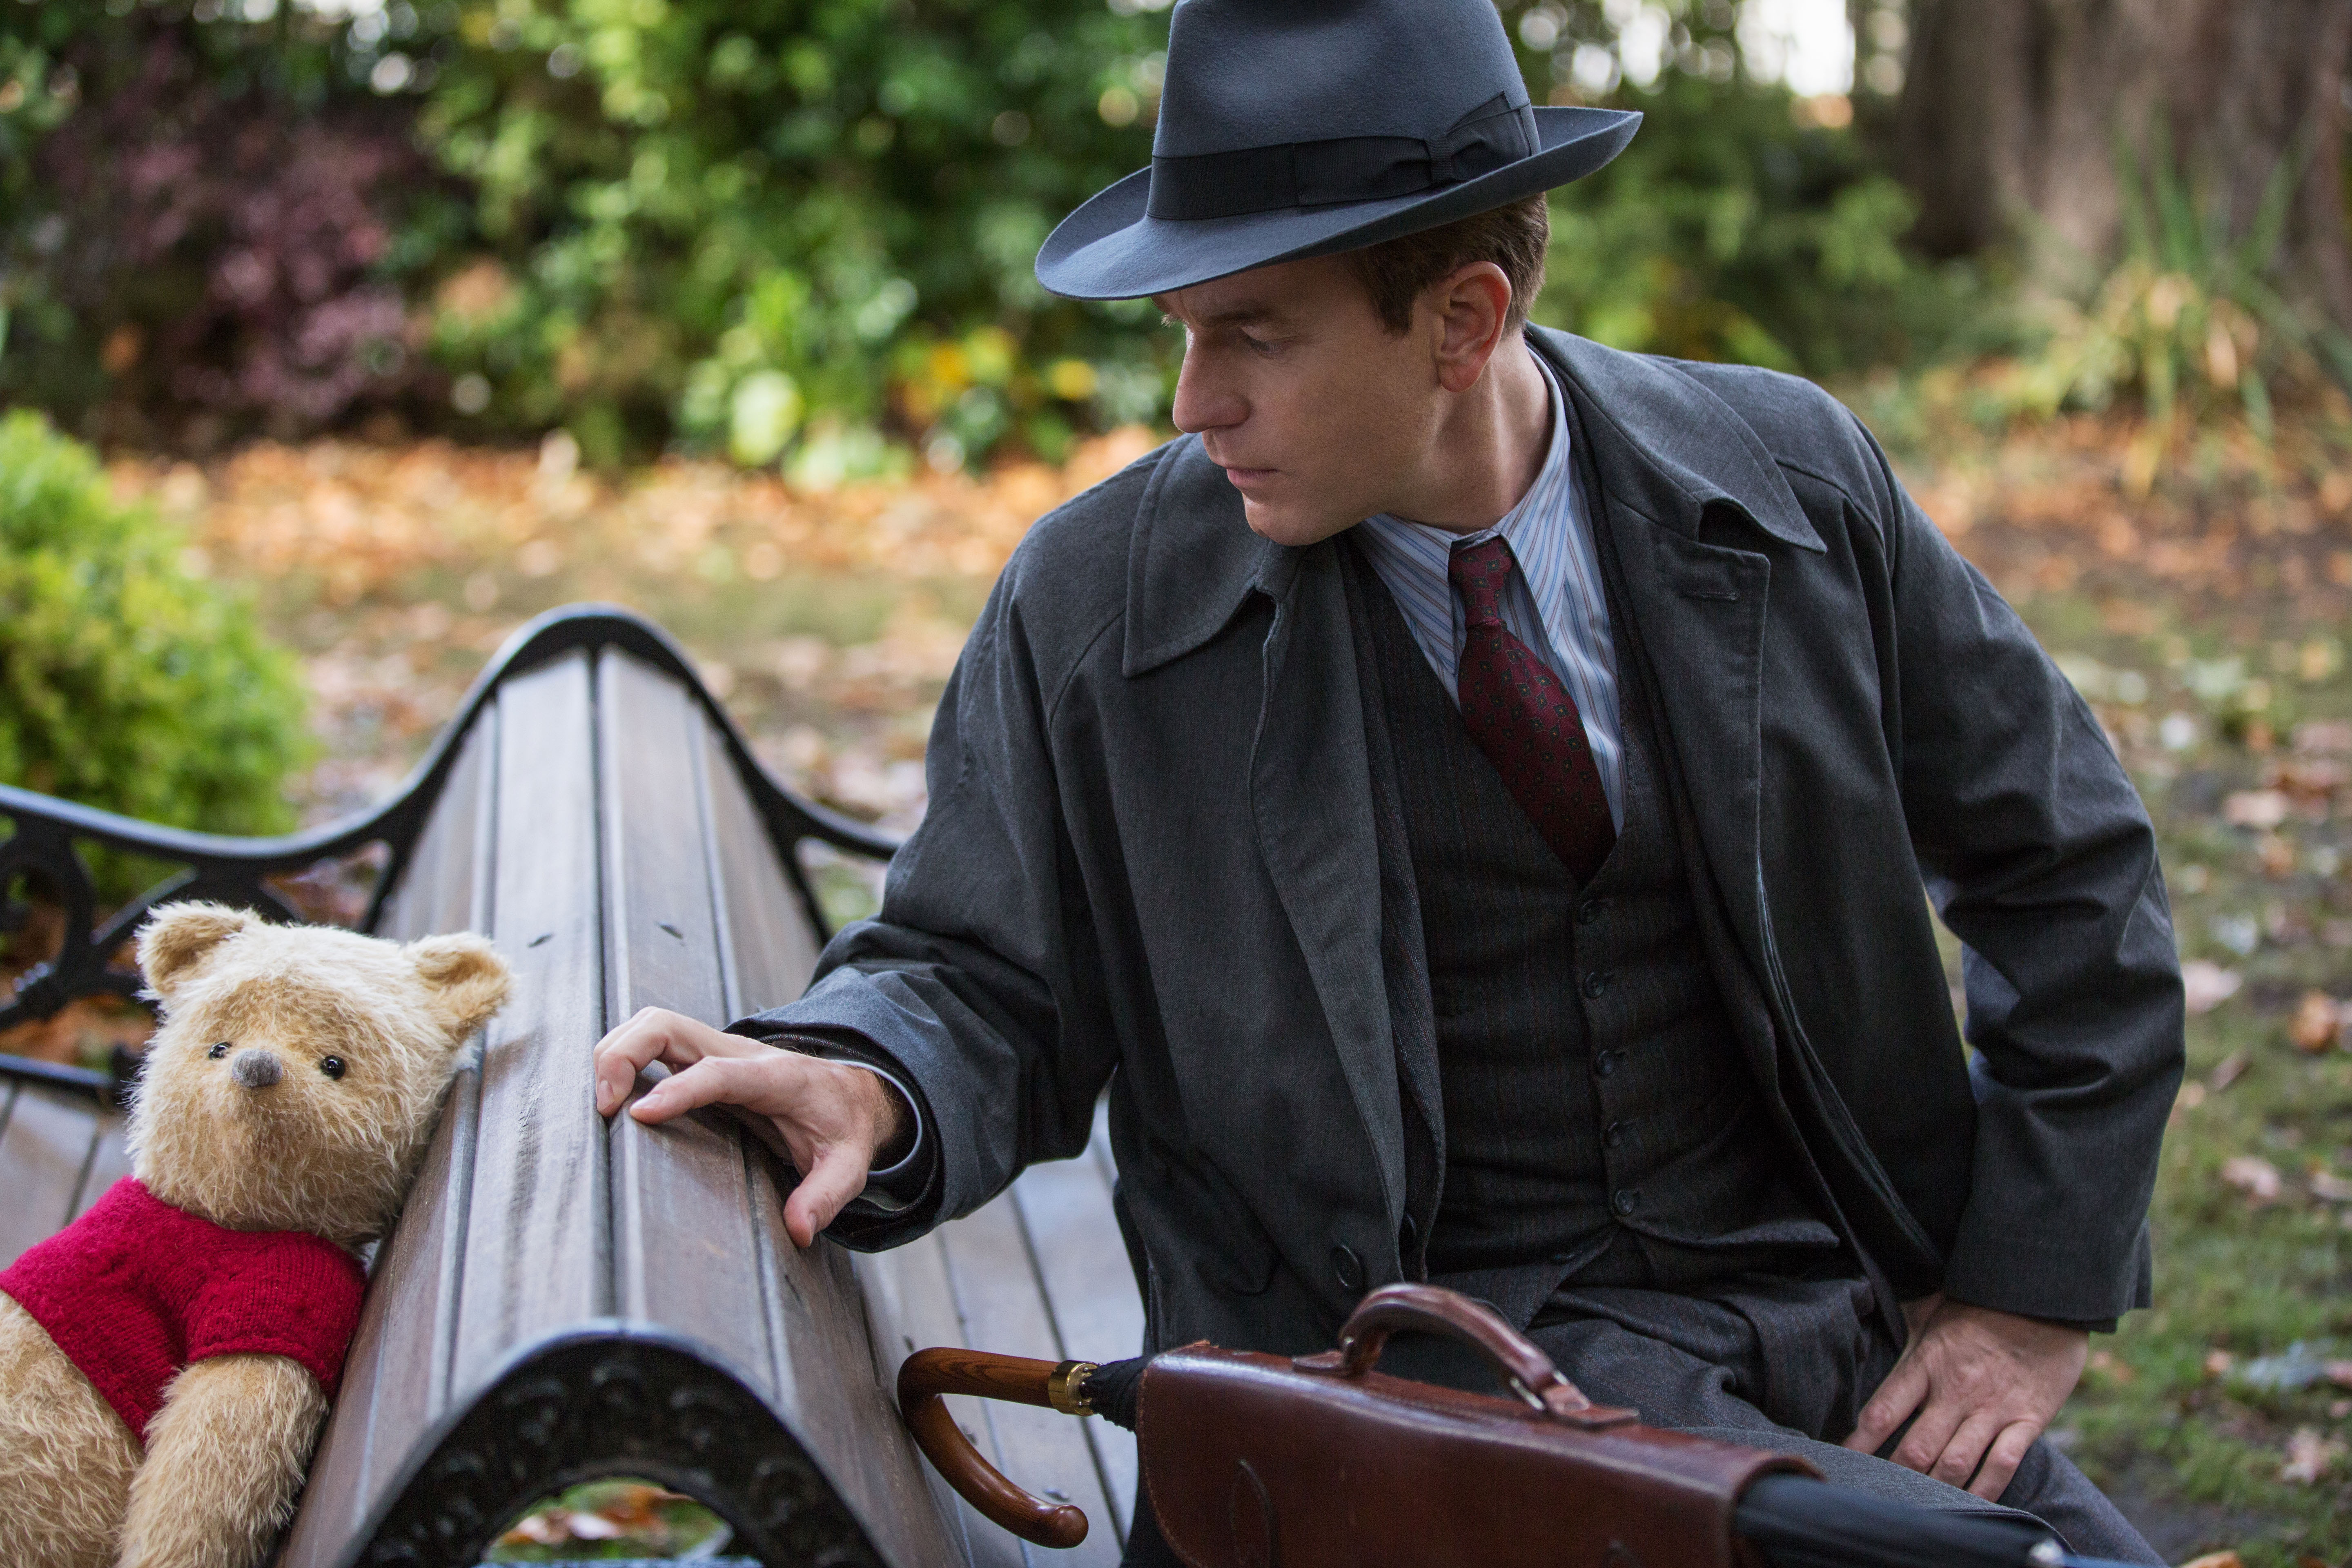 Disney Shares New Featurette for Christopher Robin as Tickets Go On Sale